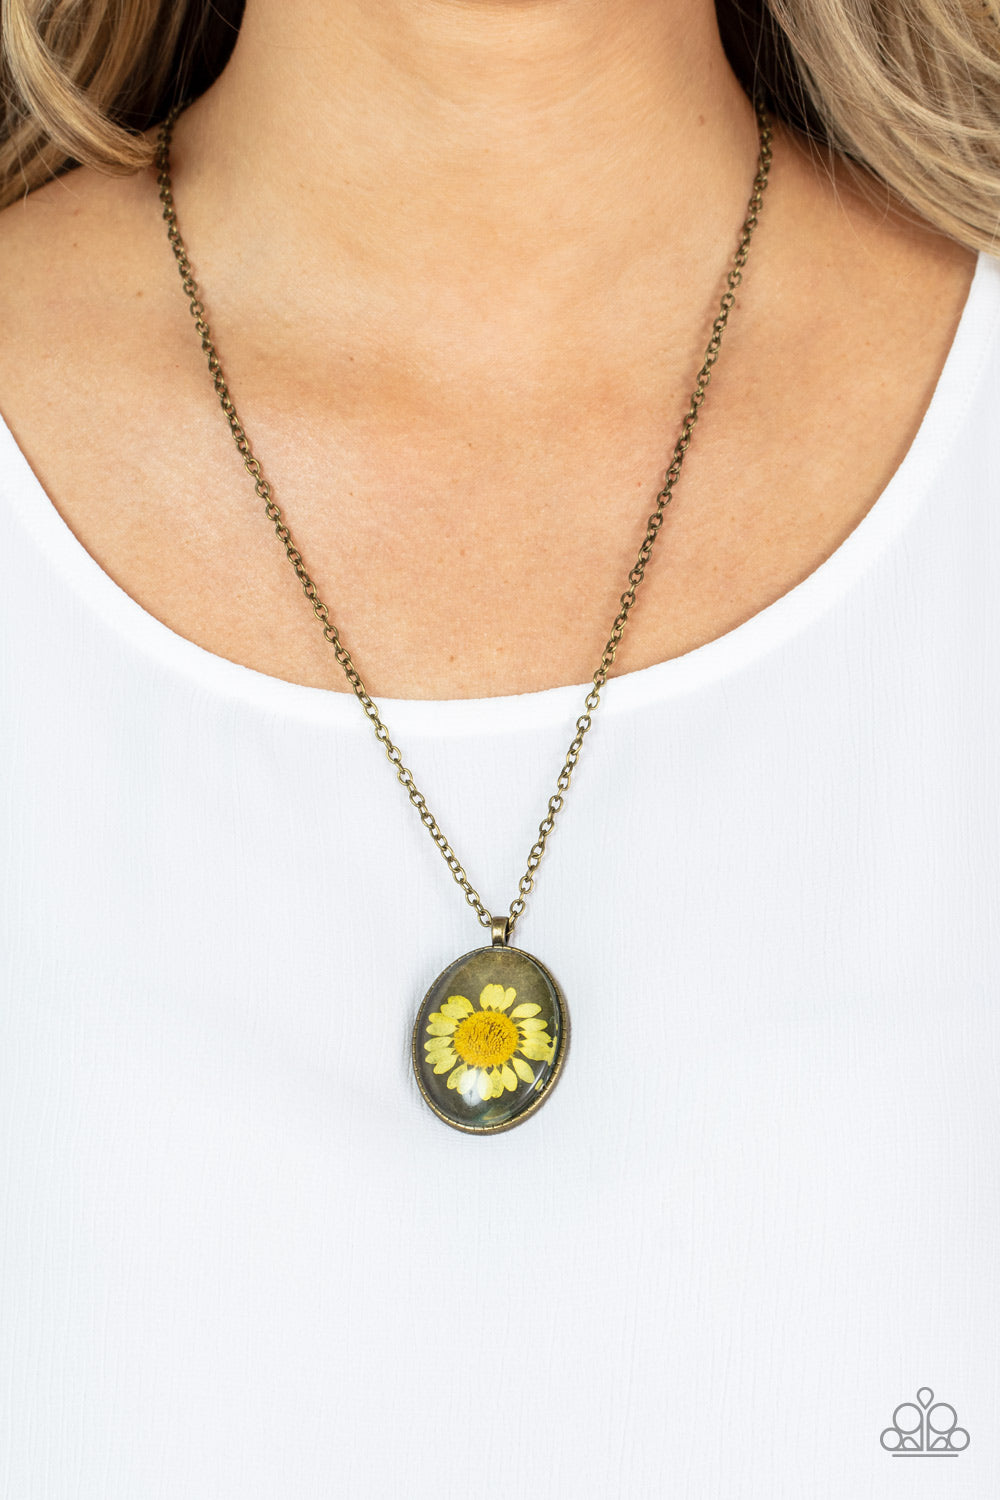 Paparazzi Accessories: Prairie Passion - Yellow Necklace